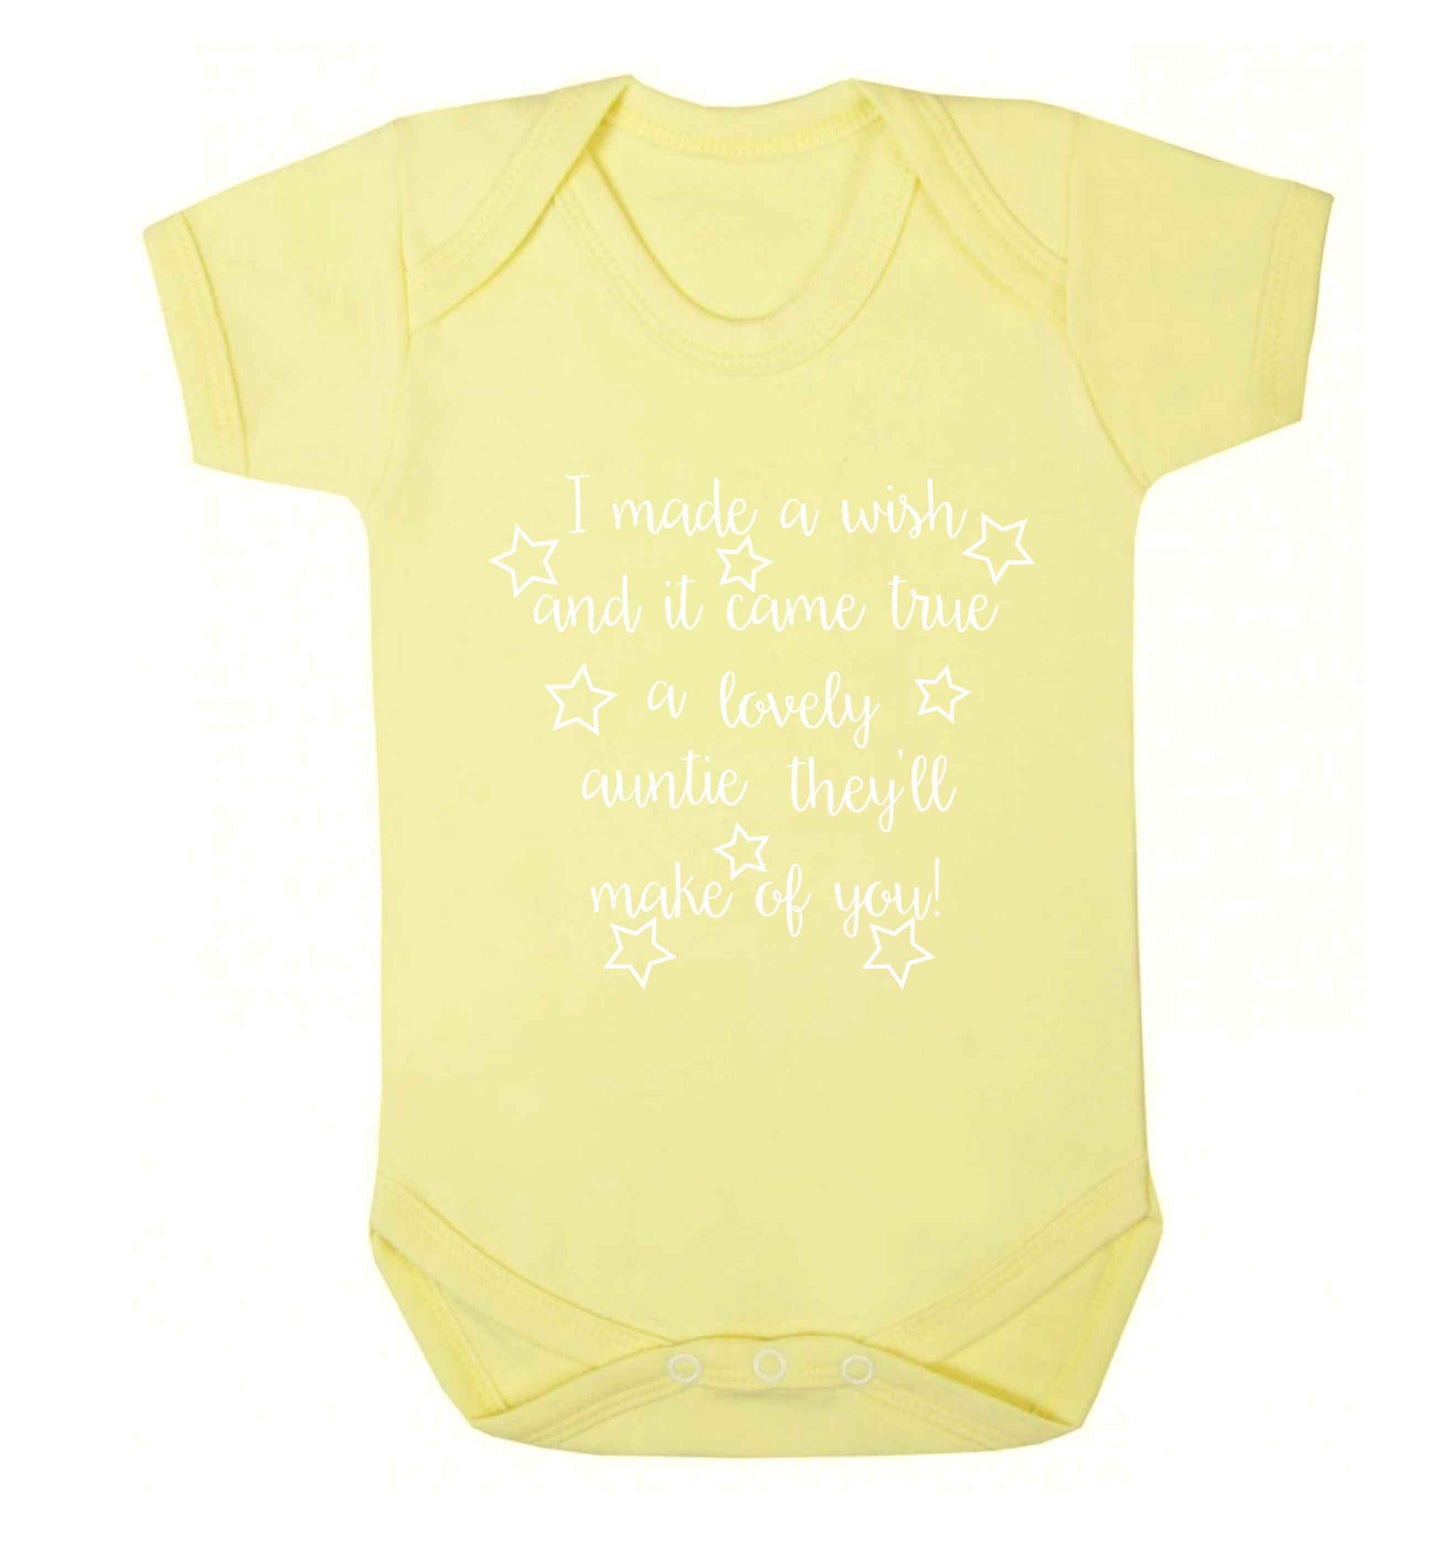 I made a wish and it came true a lovely auntie they'll make of you! Baby Vest pale yellow 18-24 months